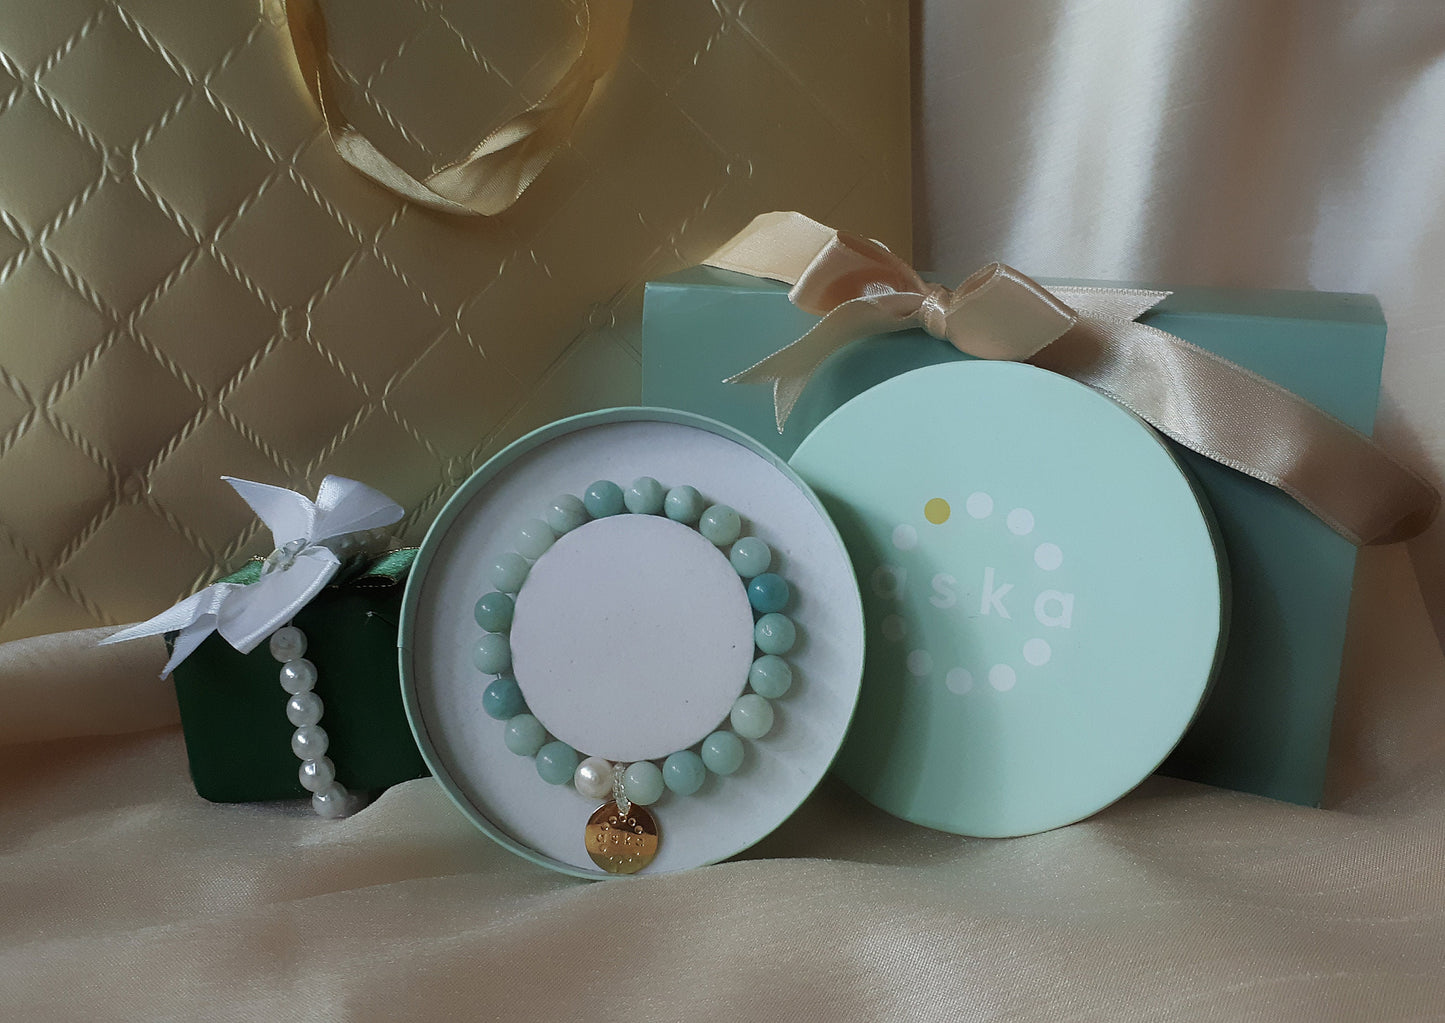 Aska Maternity Movement Bracelet in amazonite with gold plated silver pendant and premium gift box